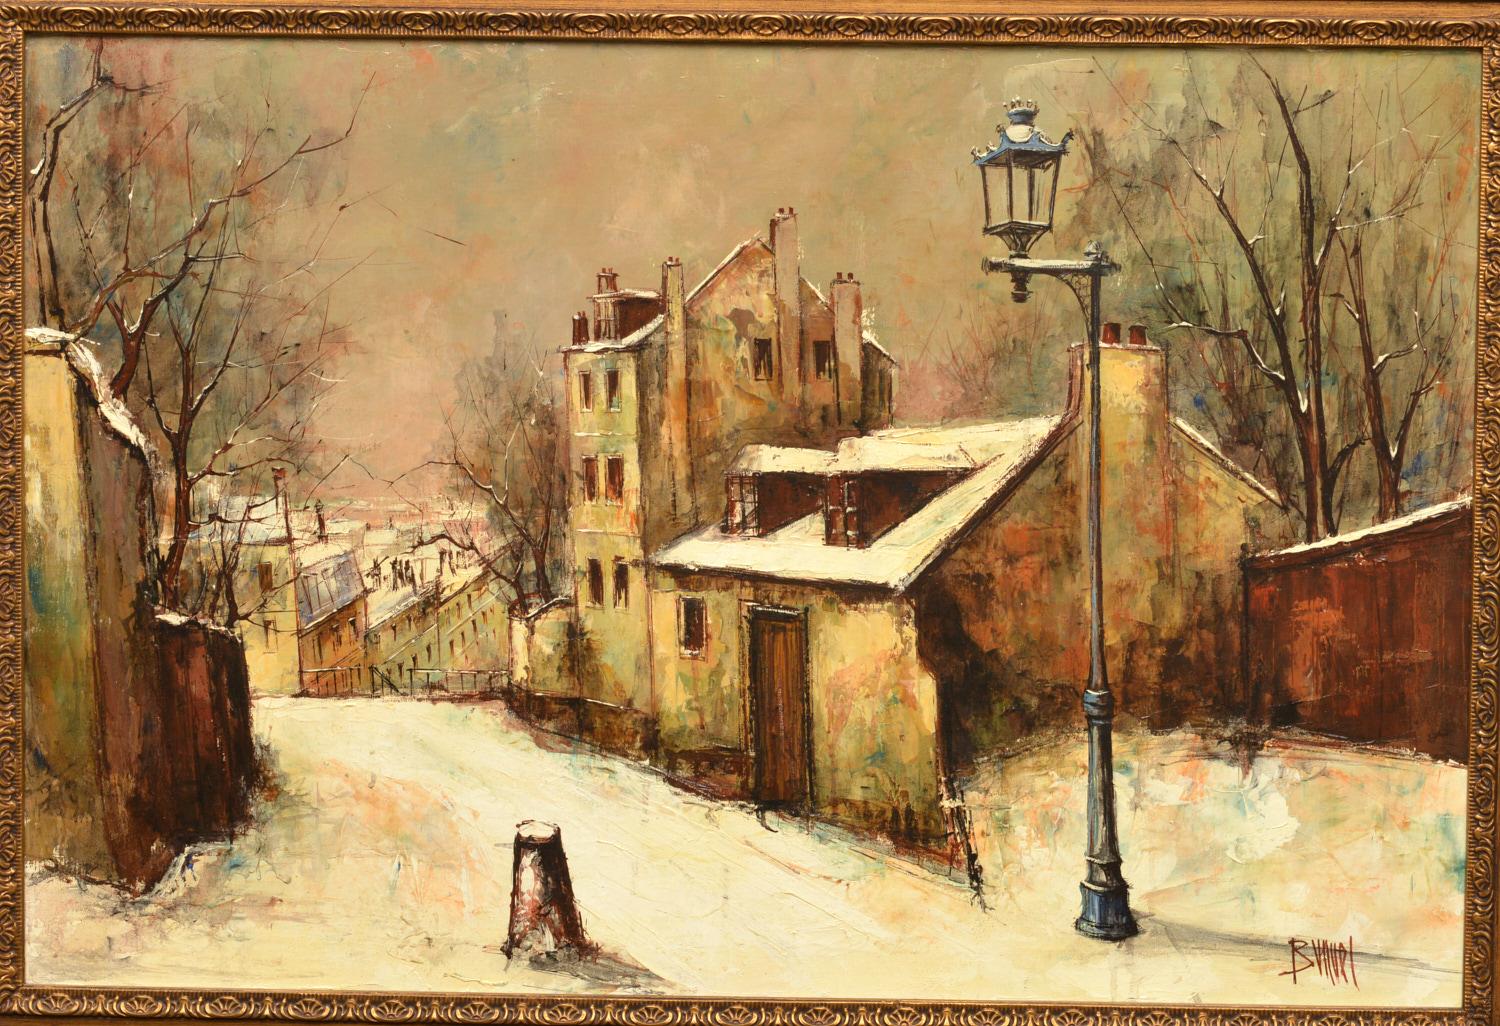 Manuel Monton Bunuel (Spanish, b. 1940), a moody Winter street scene, oil on canvas, signed Bunuel lower right, An expressive contemporary oil painting, the artist has applied the paint in hurried strokes using a palette knife. This gives depth to